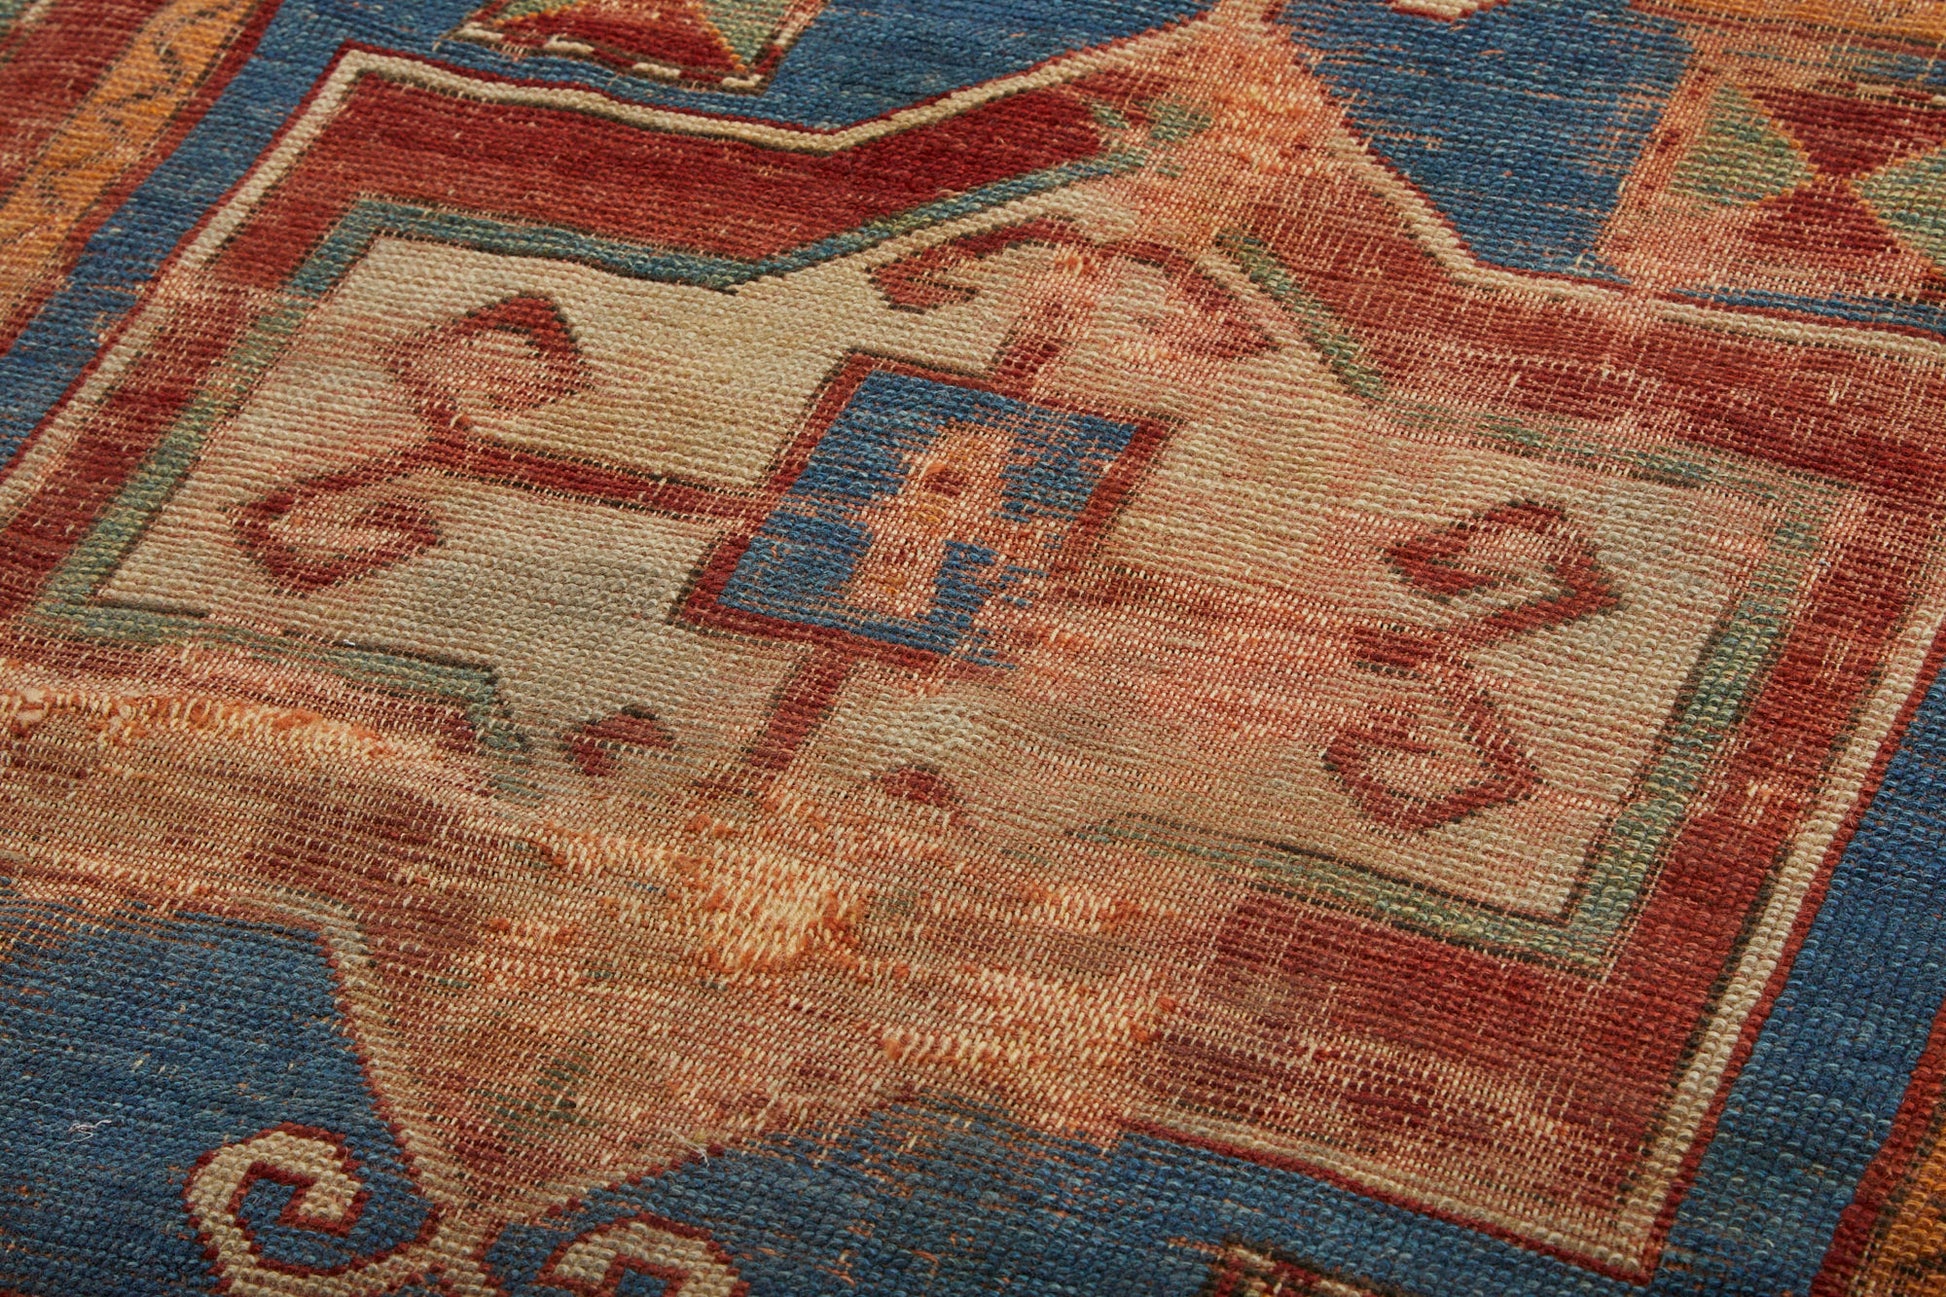 Detail of center medallion on antique Kazak Persian Rug with red, tan, blue and cream colors - Available from King Kennedy Rugs Los Angeles